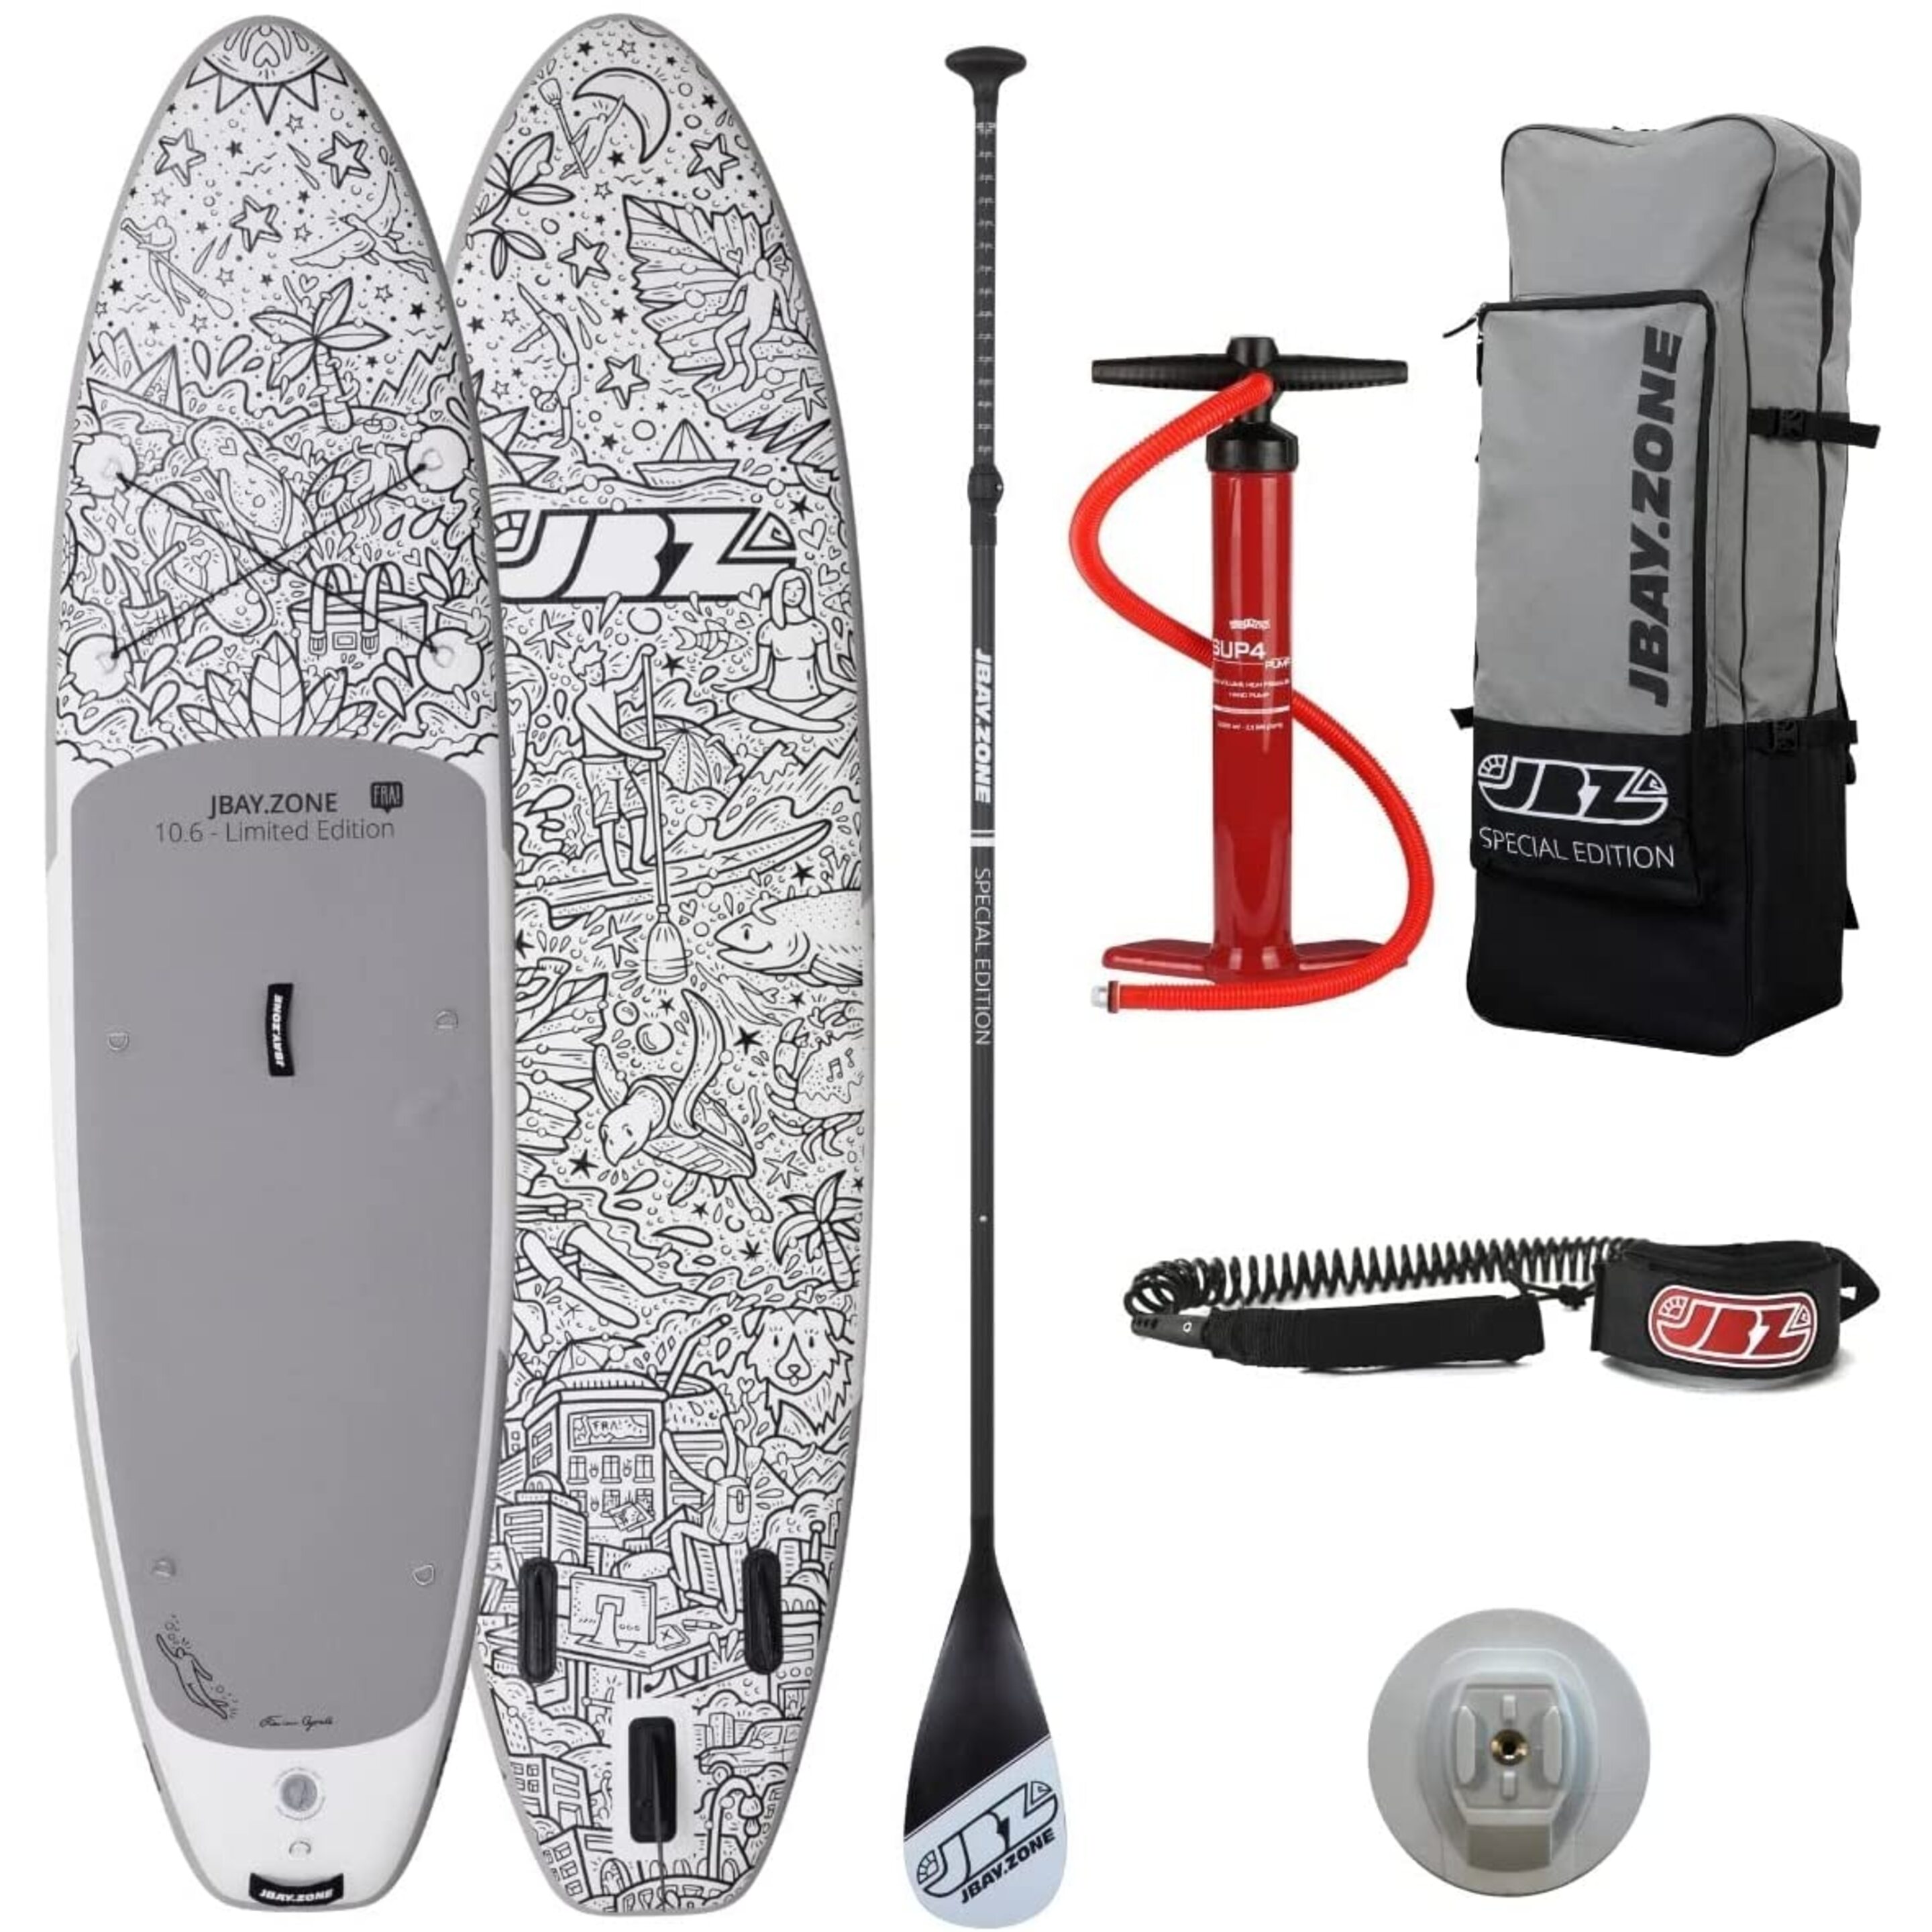 Tabla De Stand Up Paddle Surf Sup Hinchable Jbay.zone Fra! Limited Edition - Blanco/Negro  MKP